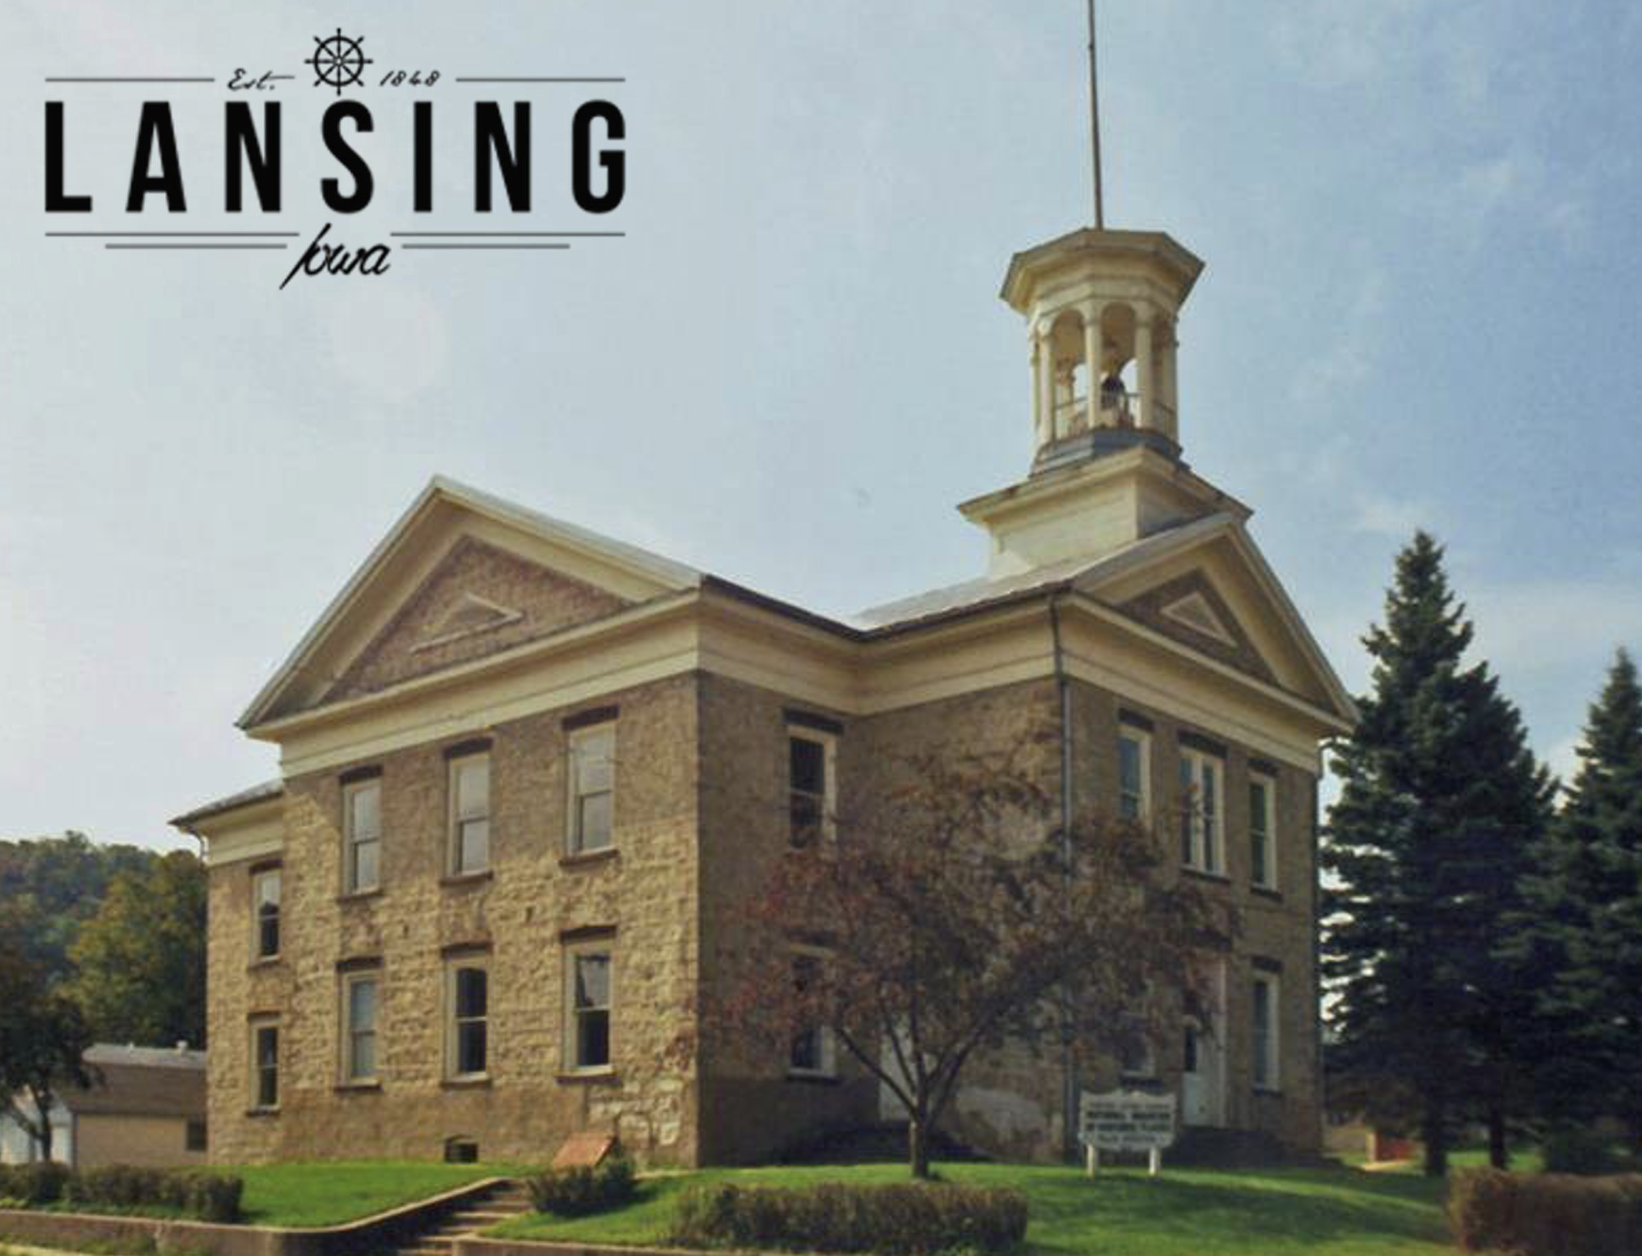 old limestone building with cupola and the title "Lansing"